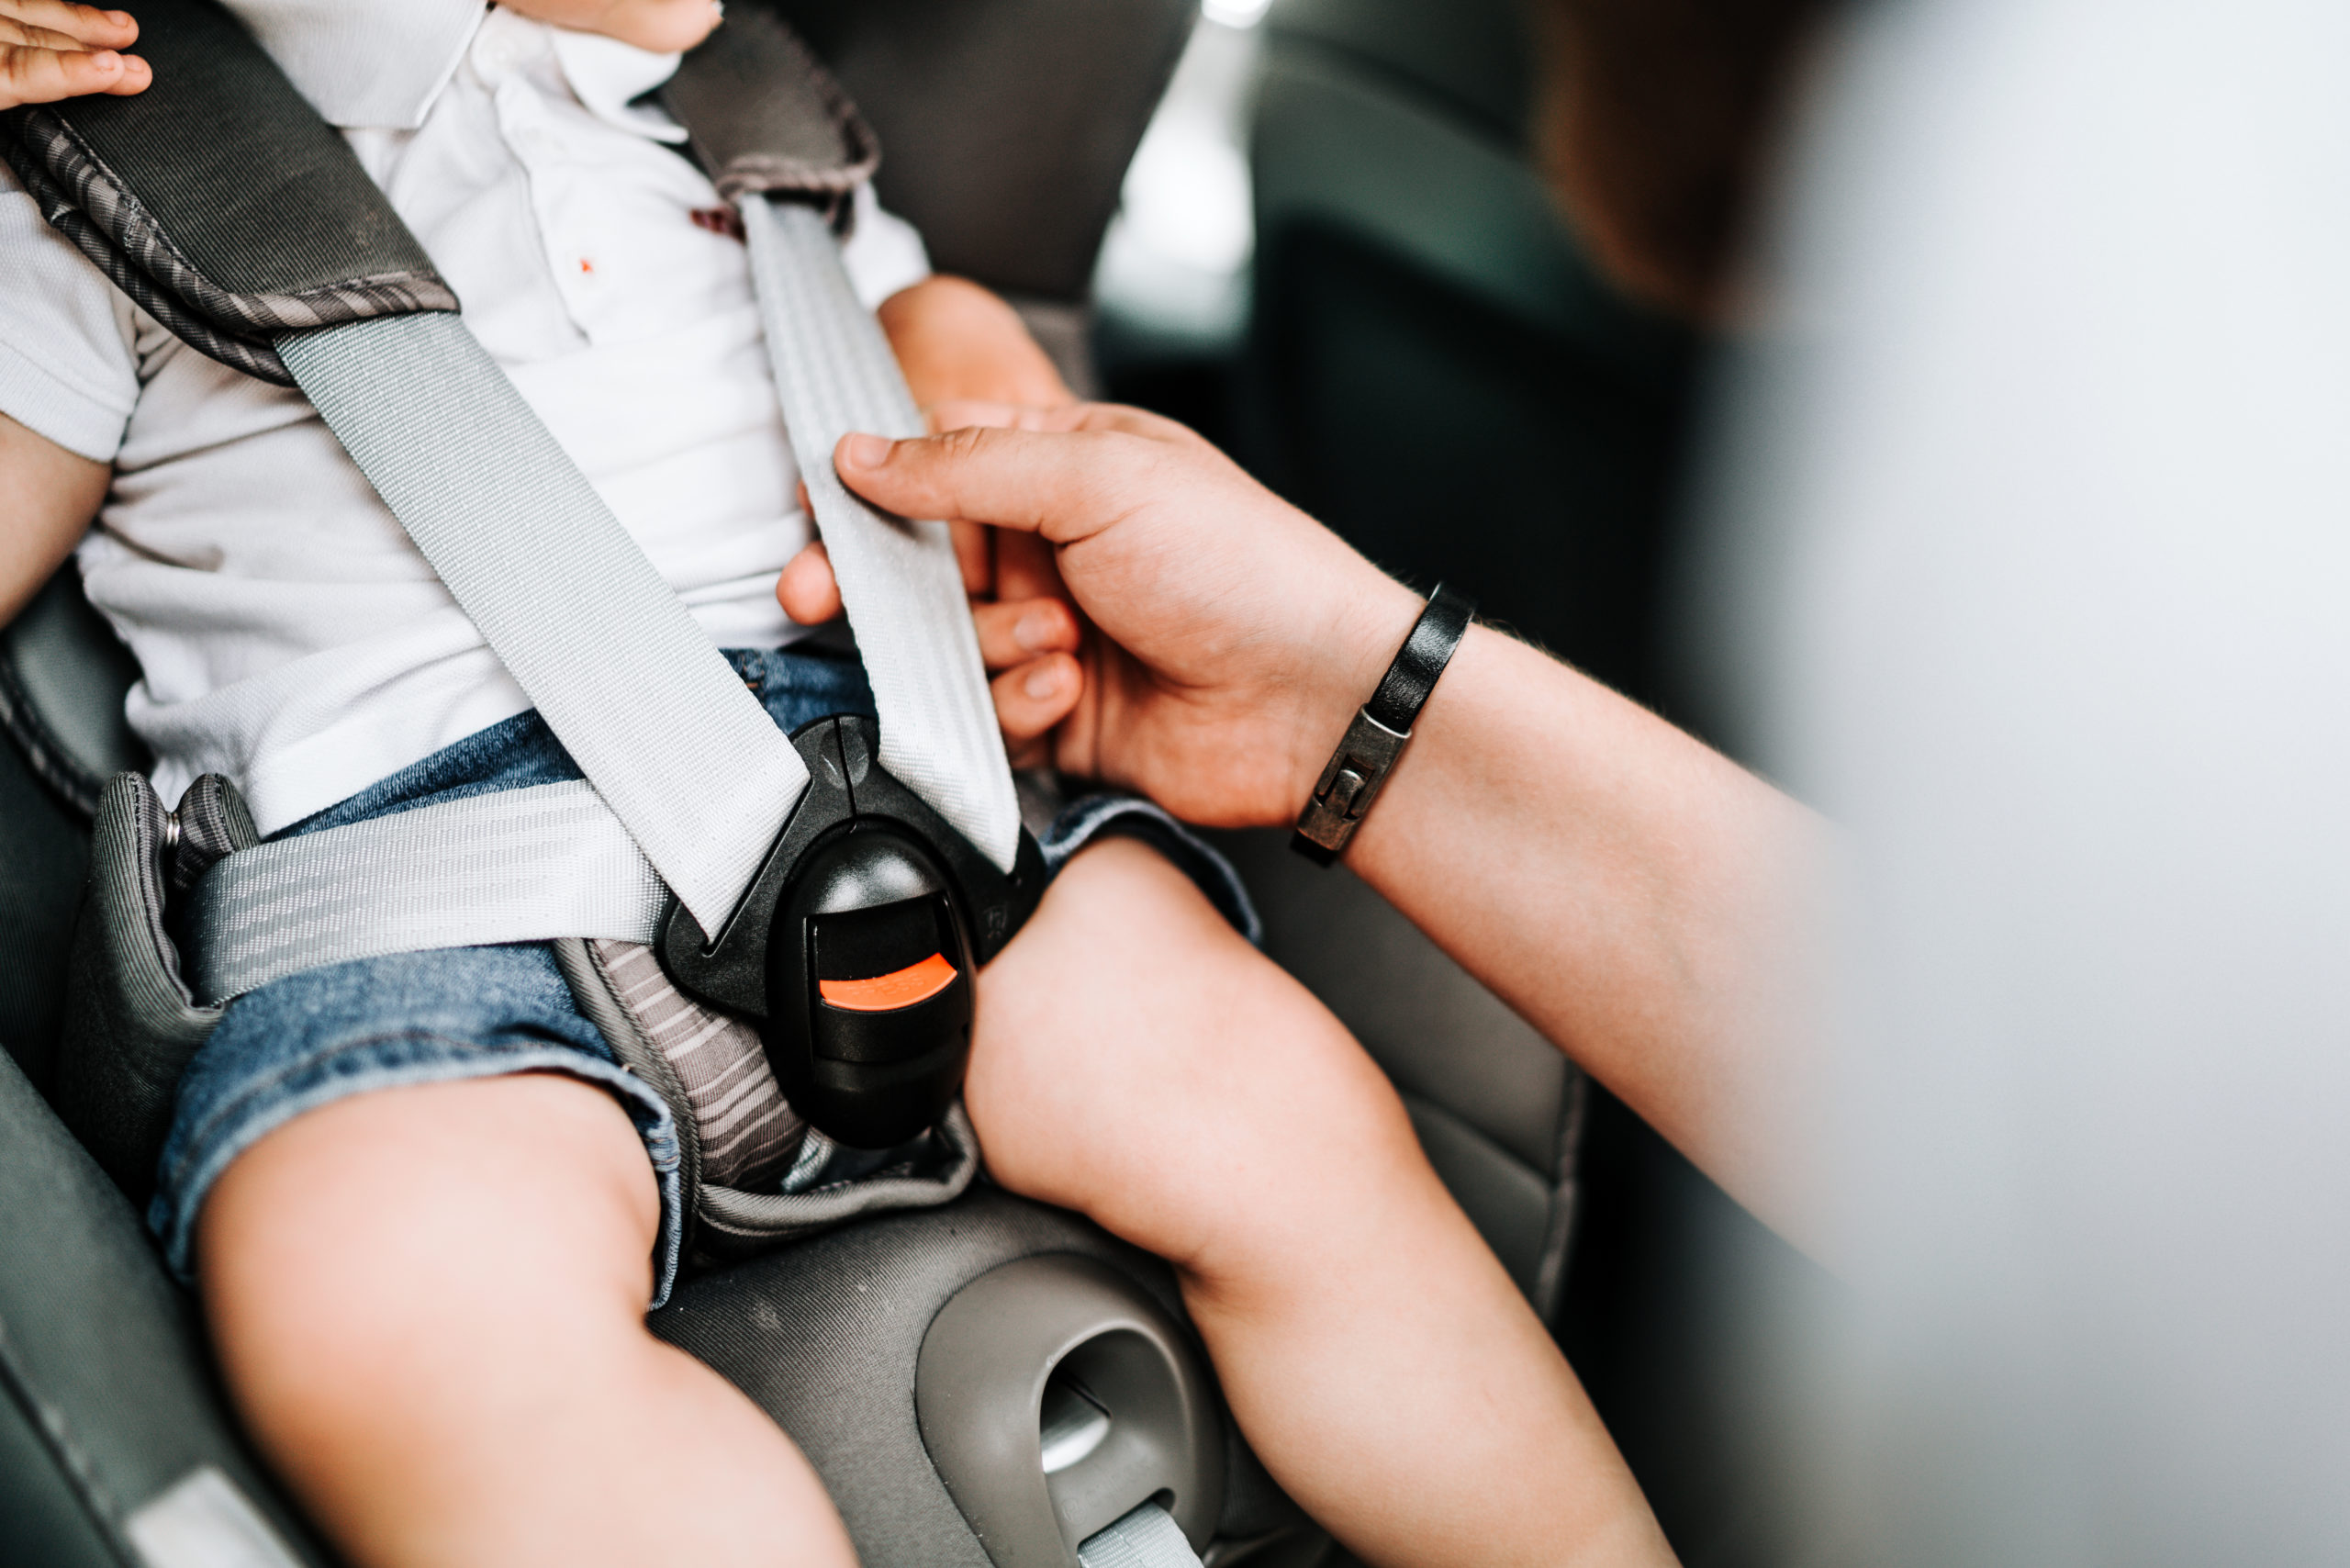 child car seat with baby inside, seatbelt and safety